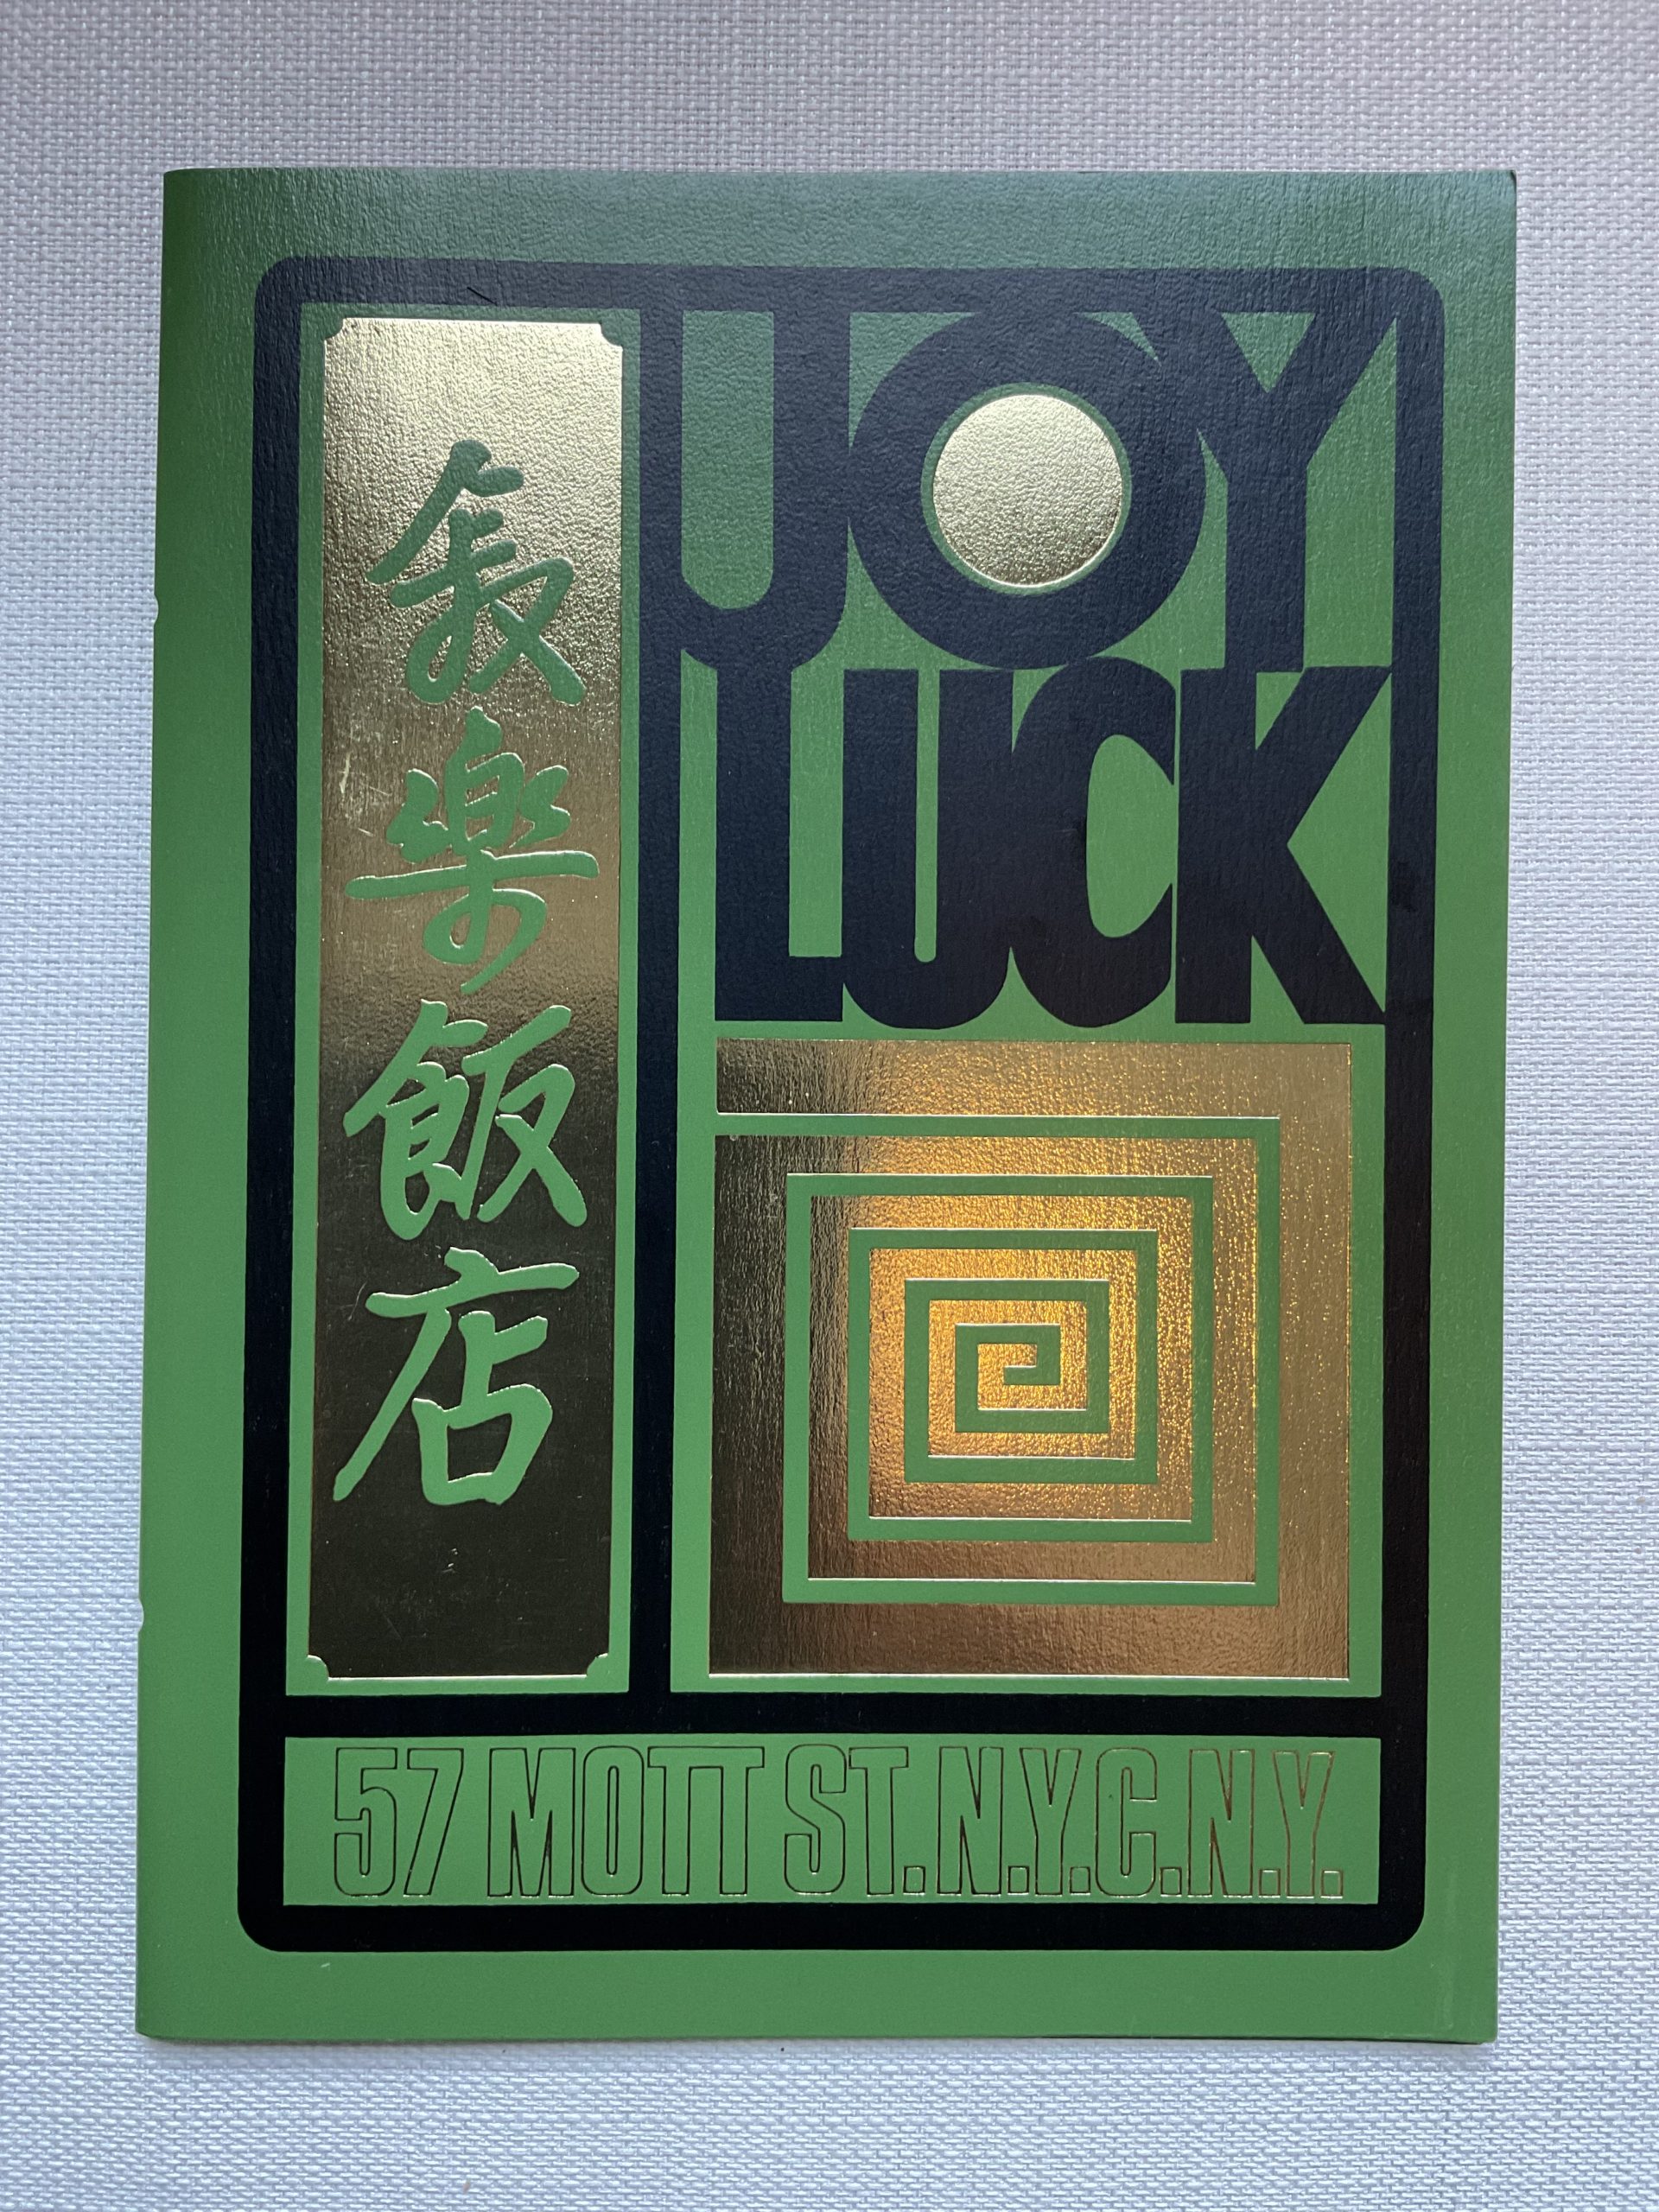 Joy Luck table menu cover. Courtesy of Pearl Leung, Museum of Chinese in America (MOCA) Collection.